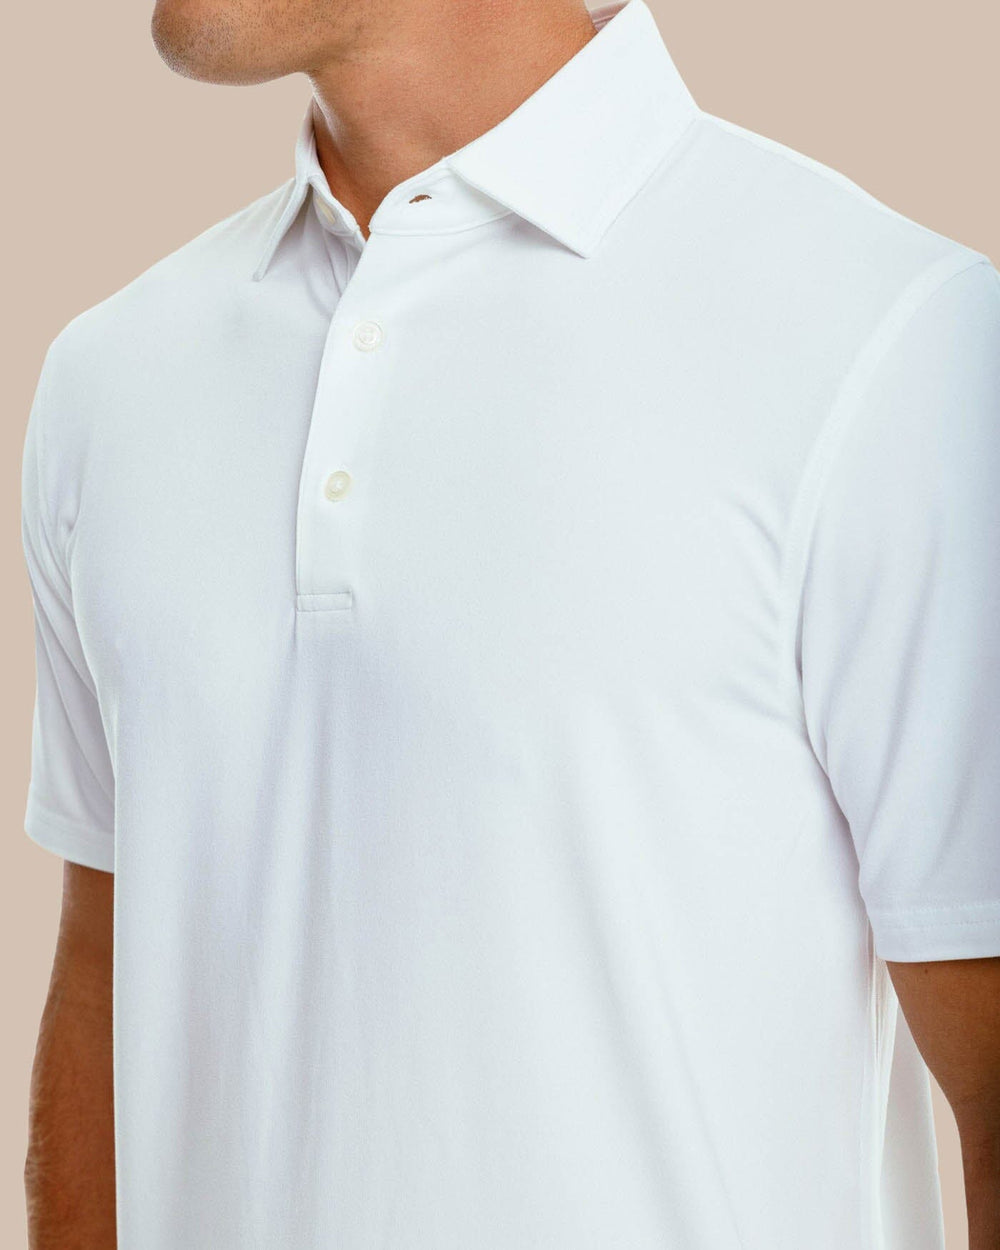 The collar of the Men's Ryder Performance Polo Shirt by Southern Tide - Classic White